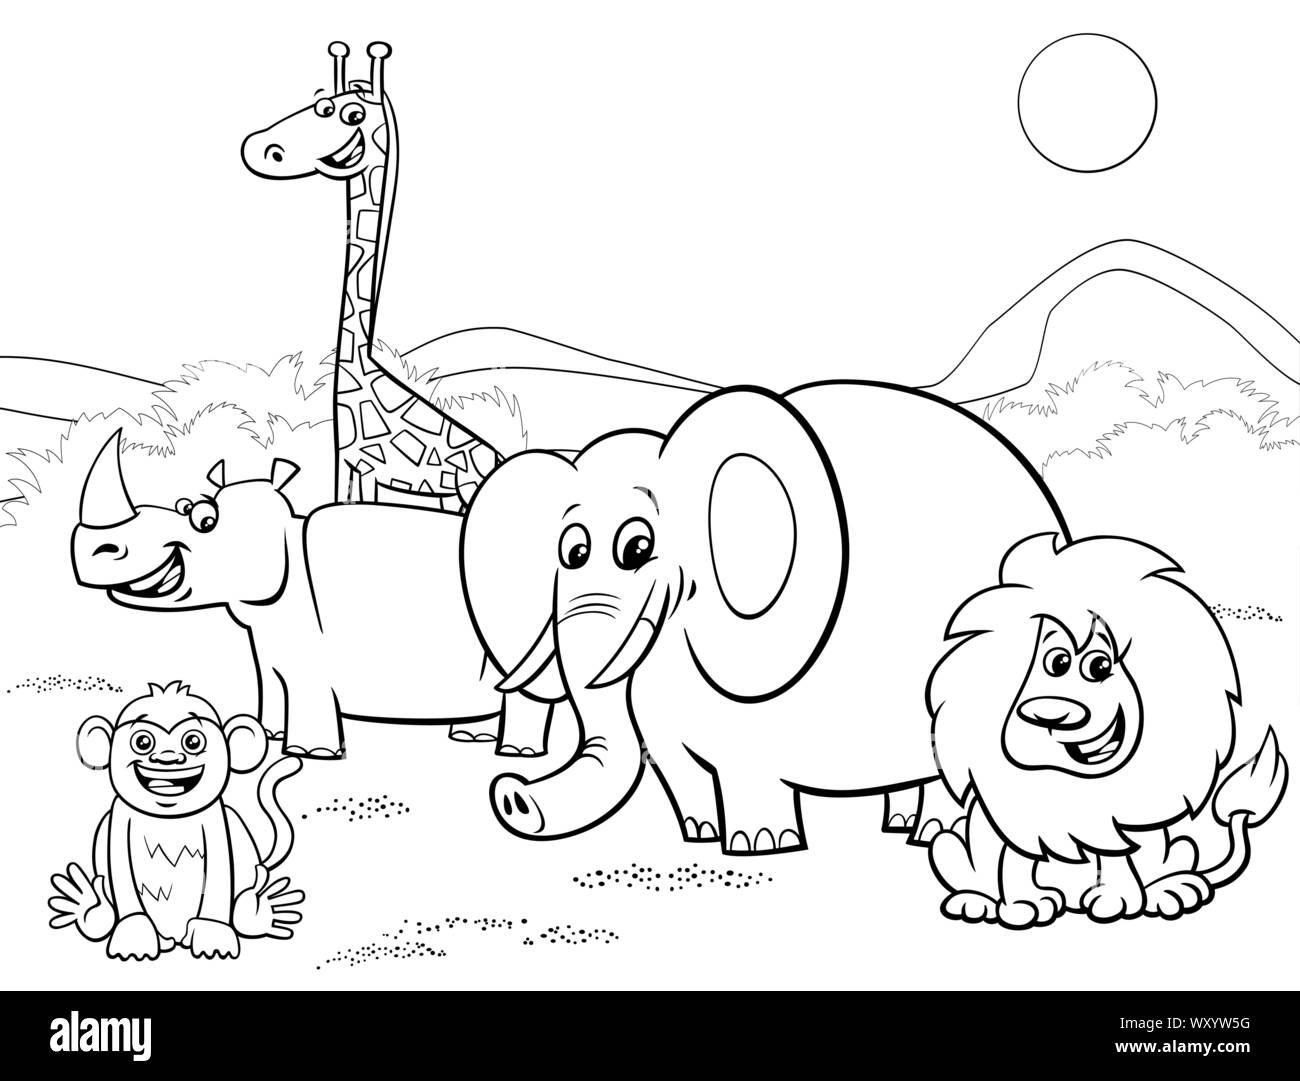 Black and White Cartoon Illustration of Wild Safari Animals Comic Characters Group Coloring Book Page Stock Vector